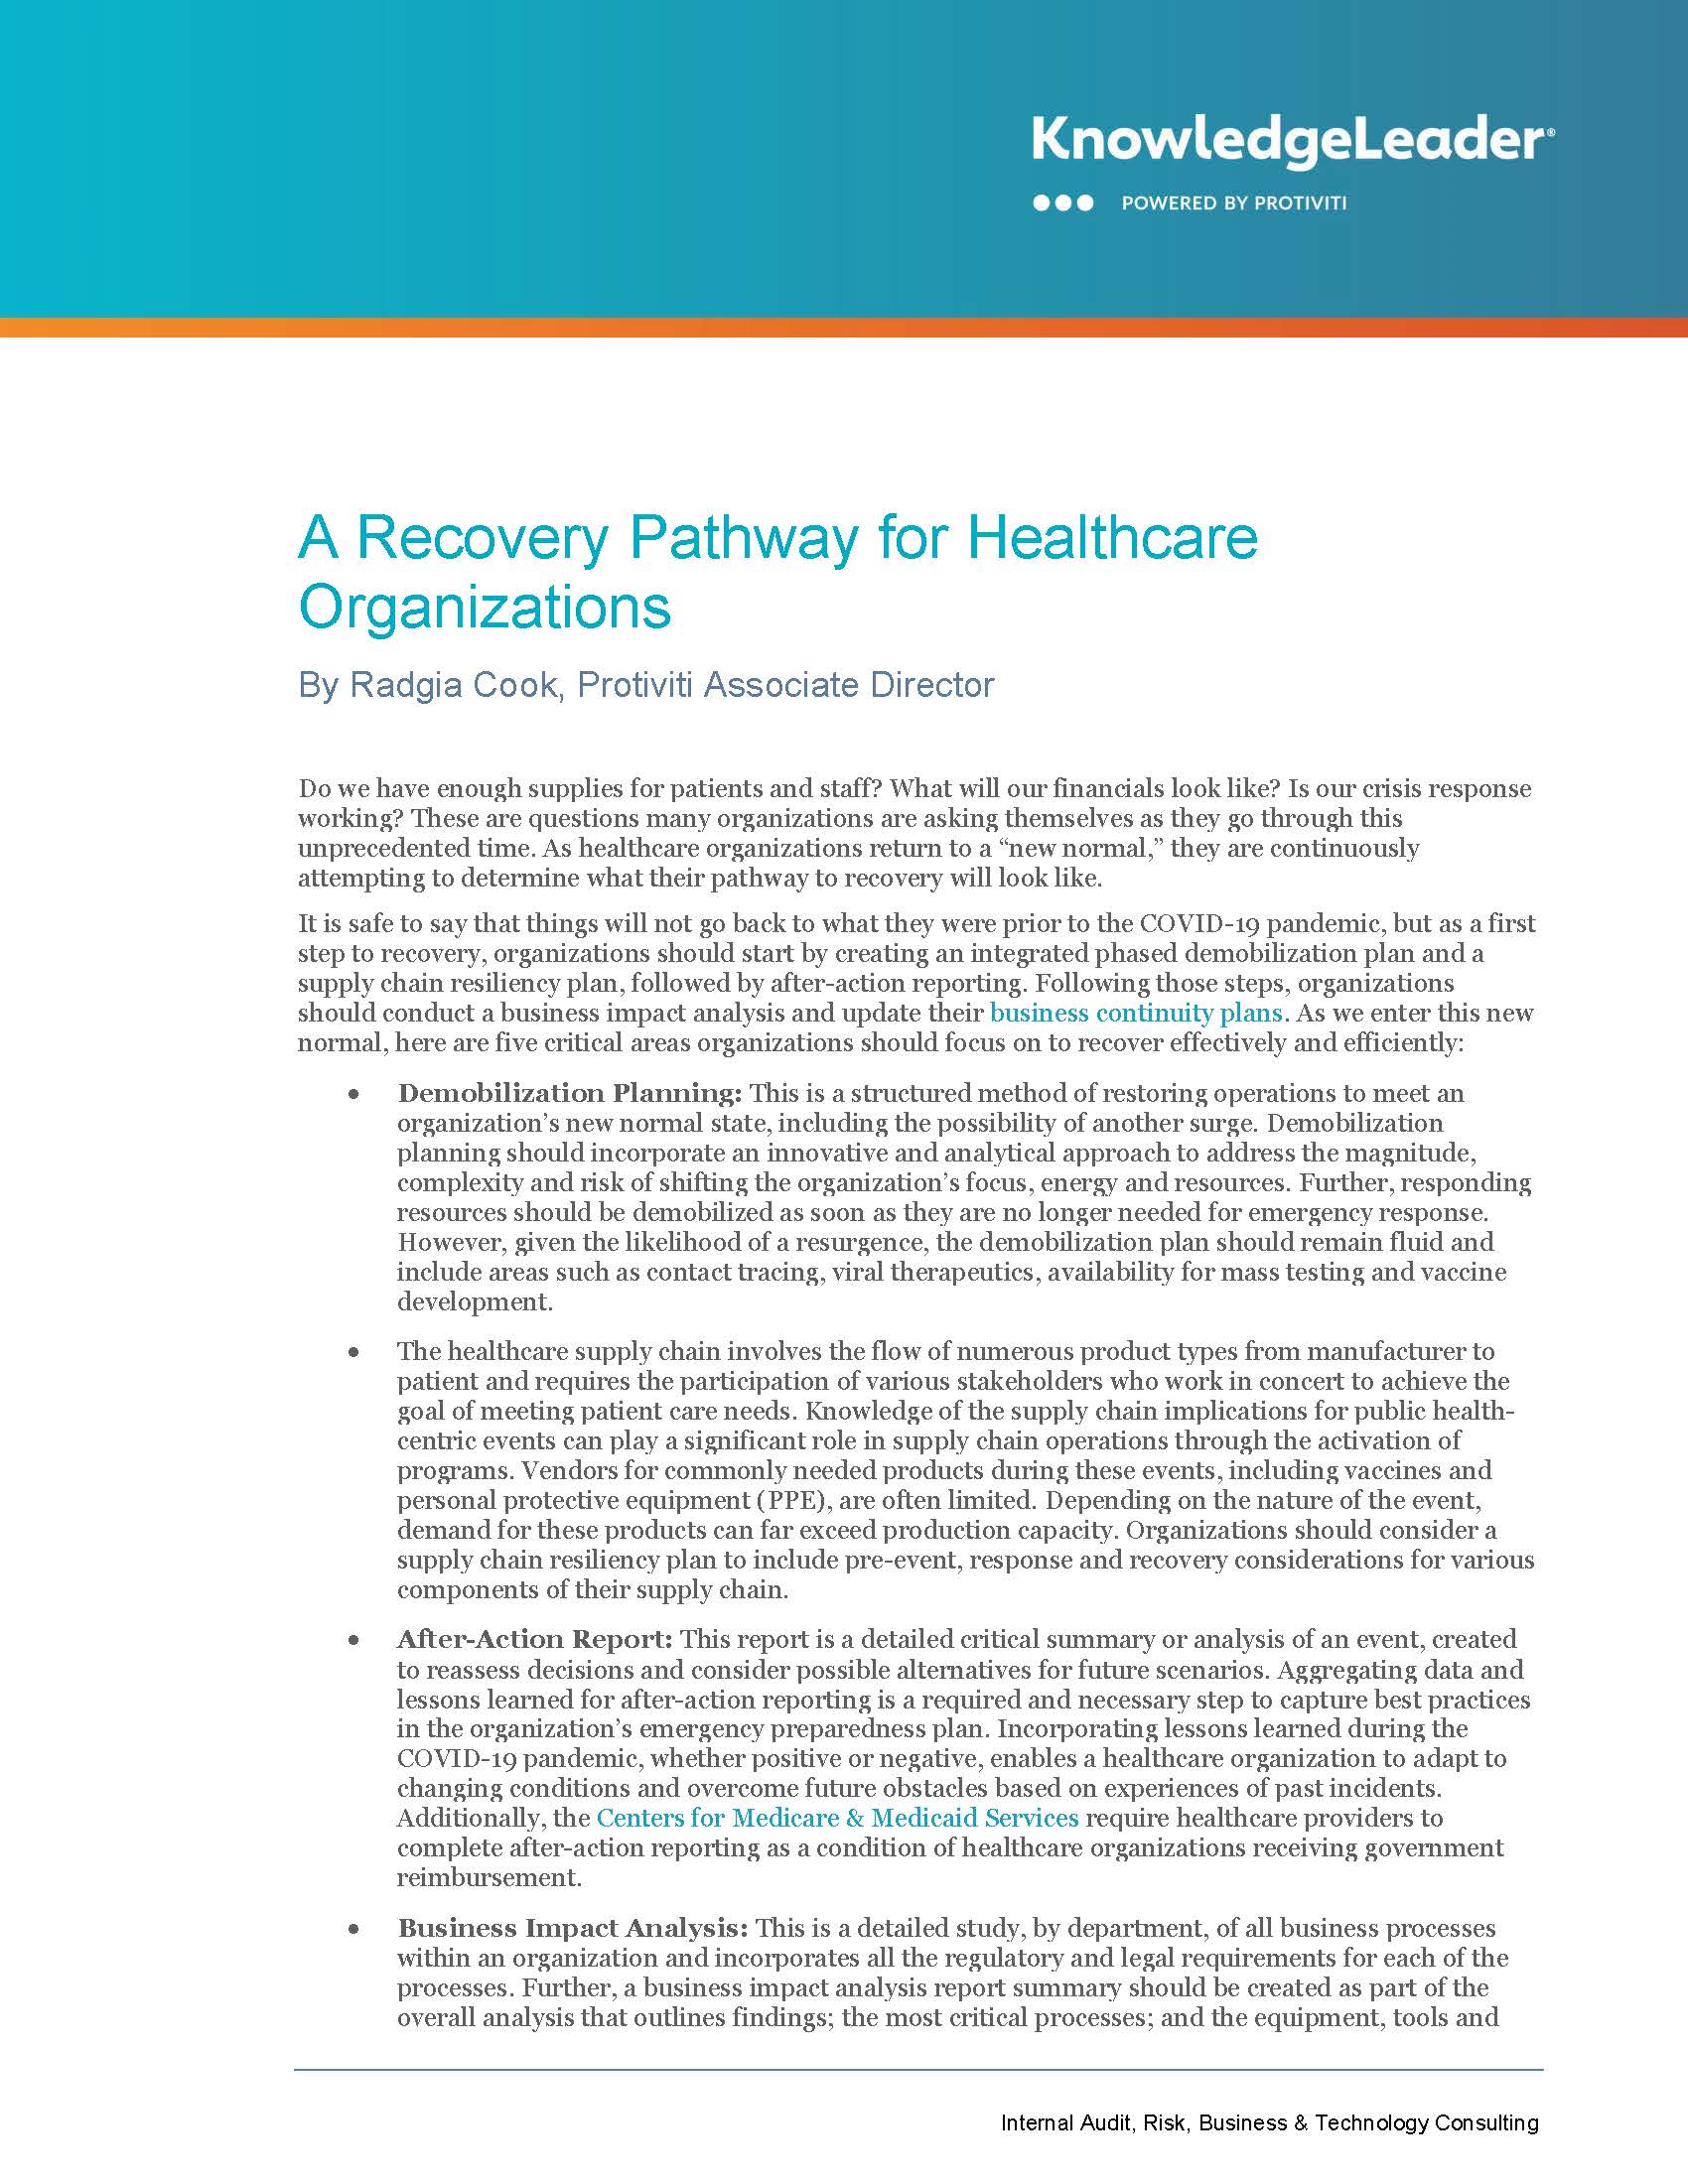 Screenshot of the first page of (A Recovery Pathway for Healthcare Organizations)